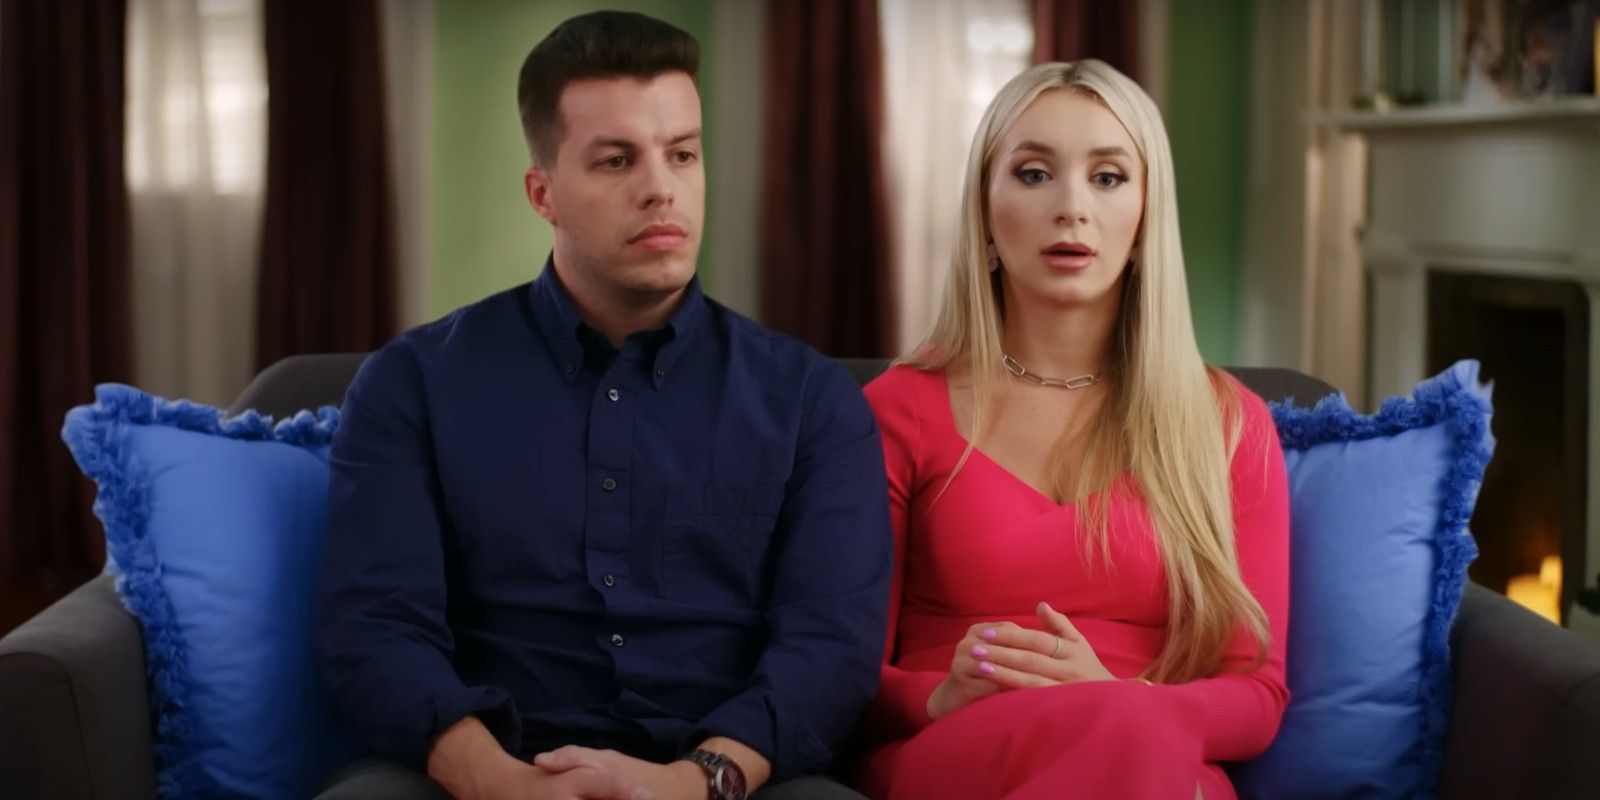 90 Day Fiance's Yara Zaya and Jovi Dufren sitting on couch looking serious